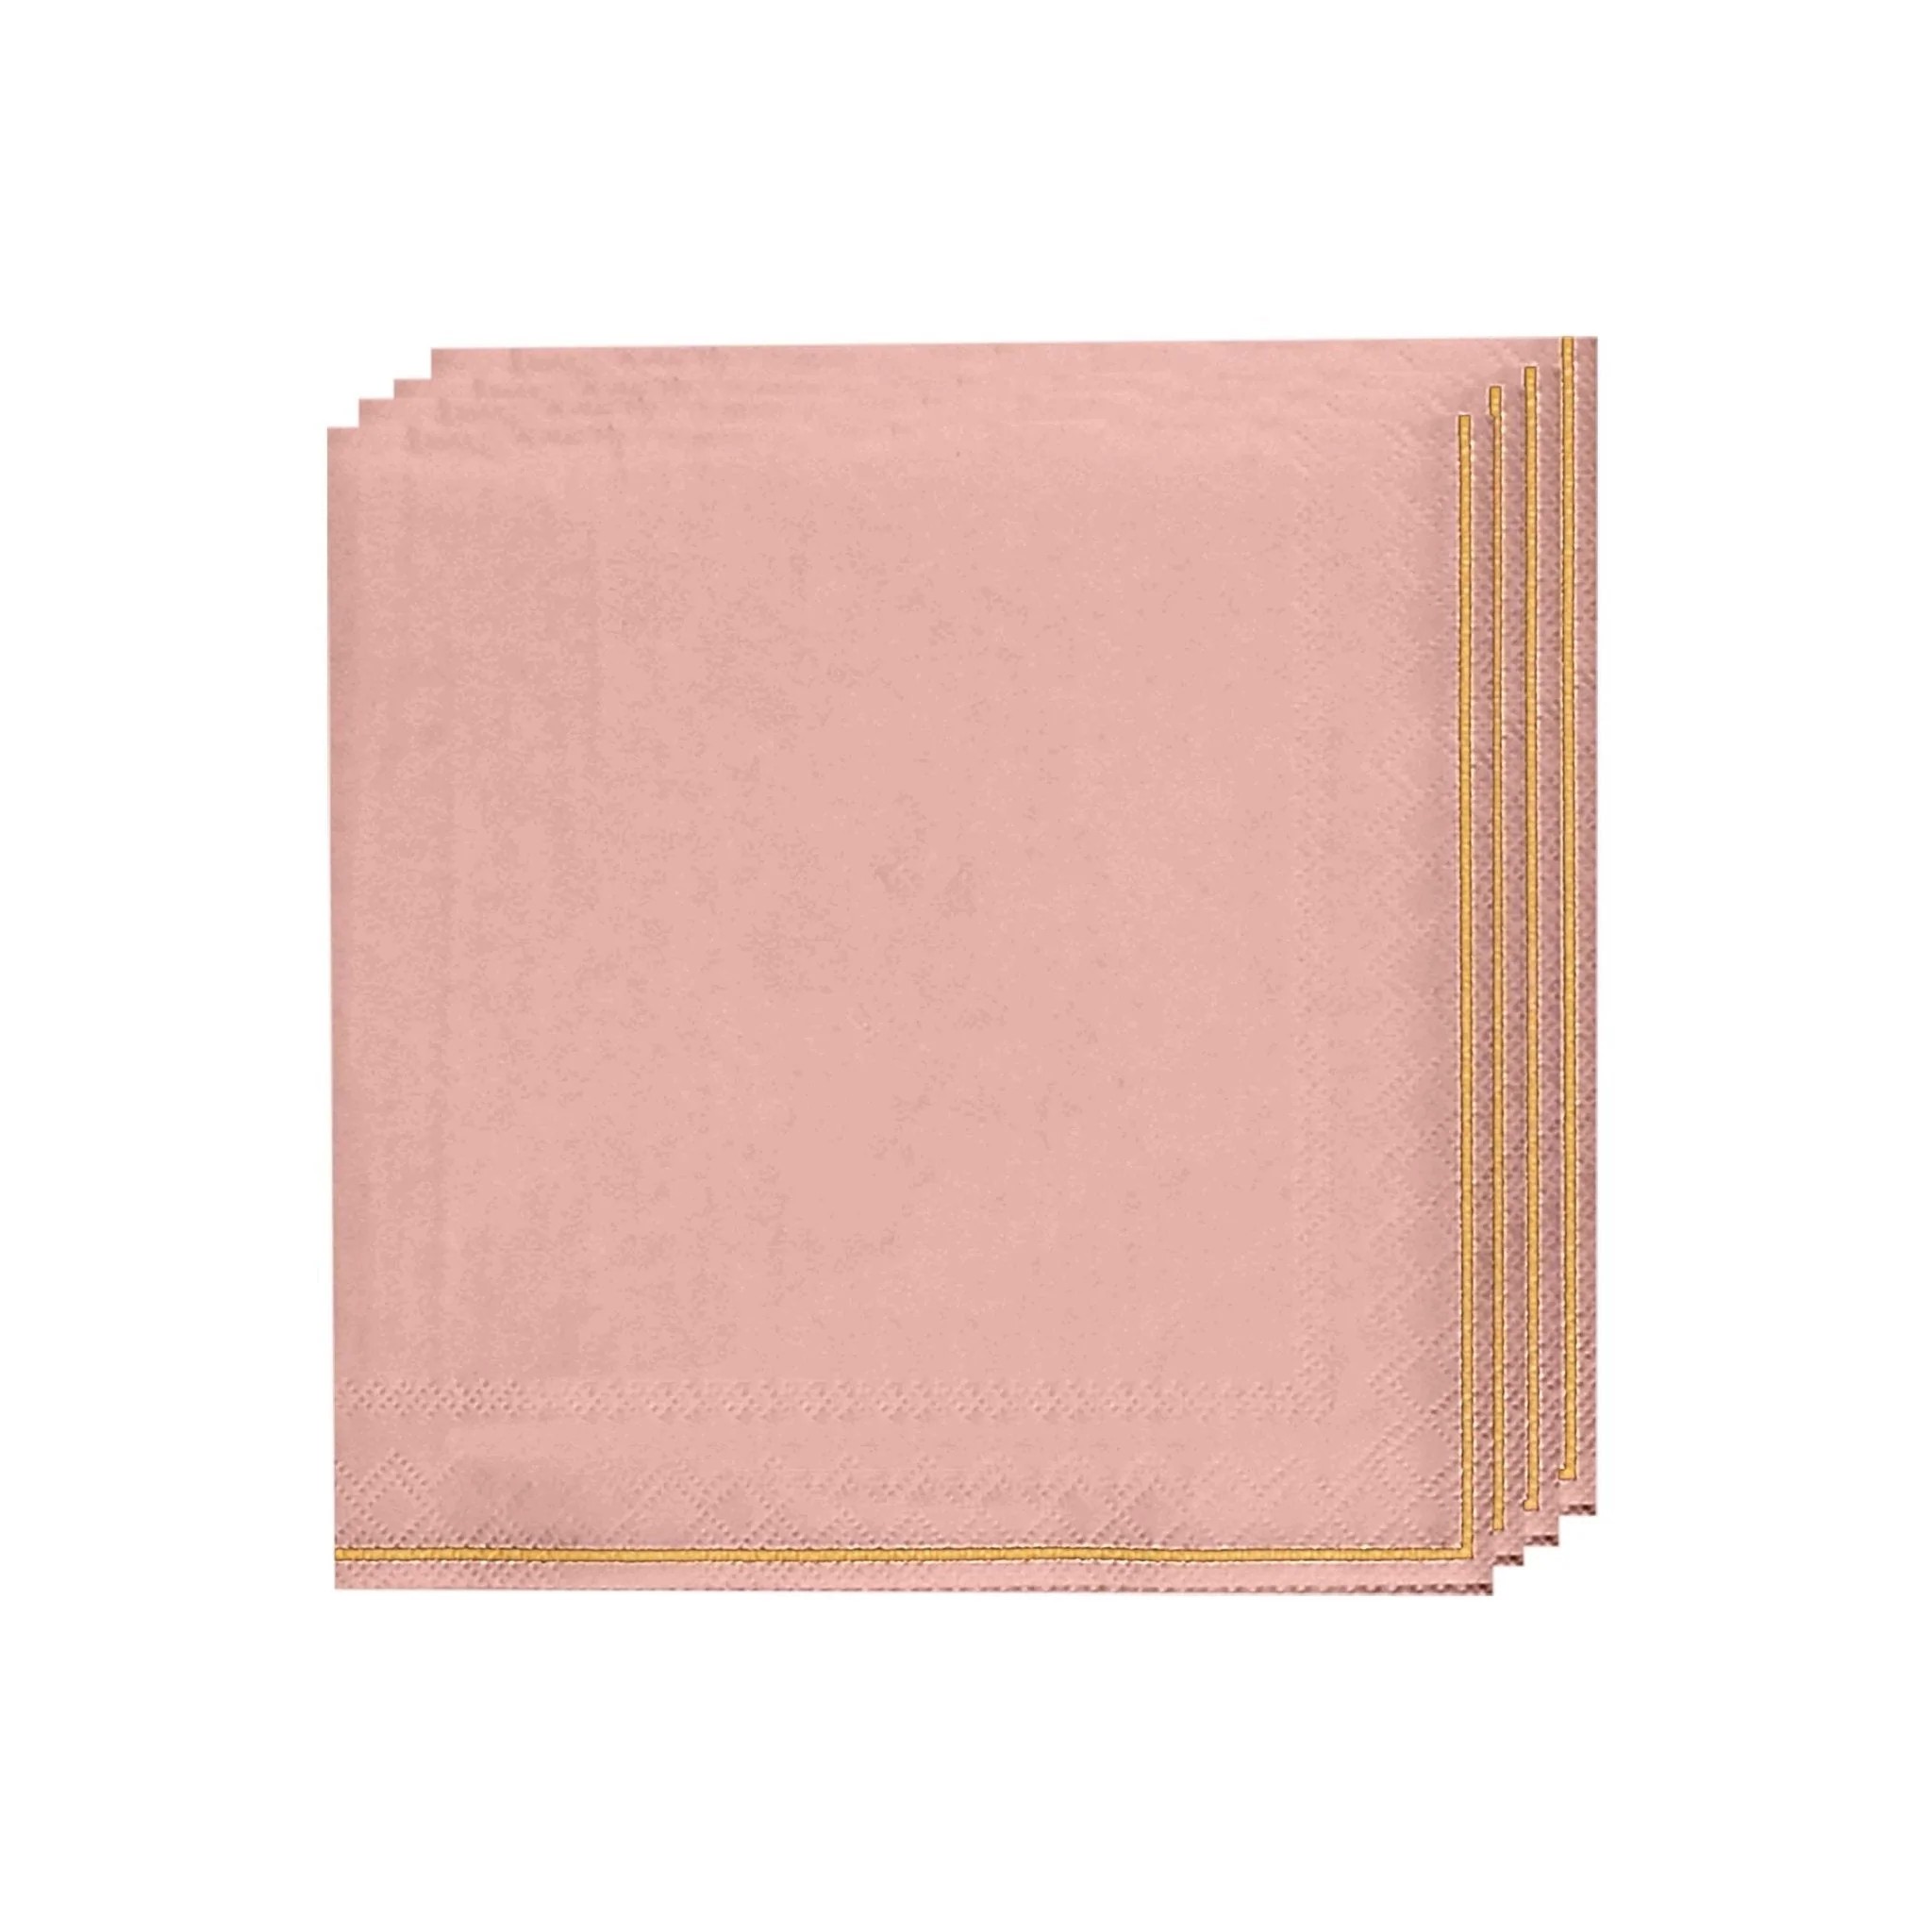 Luxe Party Coral with Gold Stripe Beverage Napkins - 20 pcs